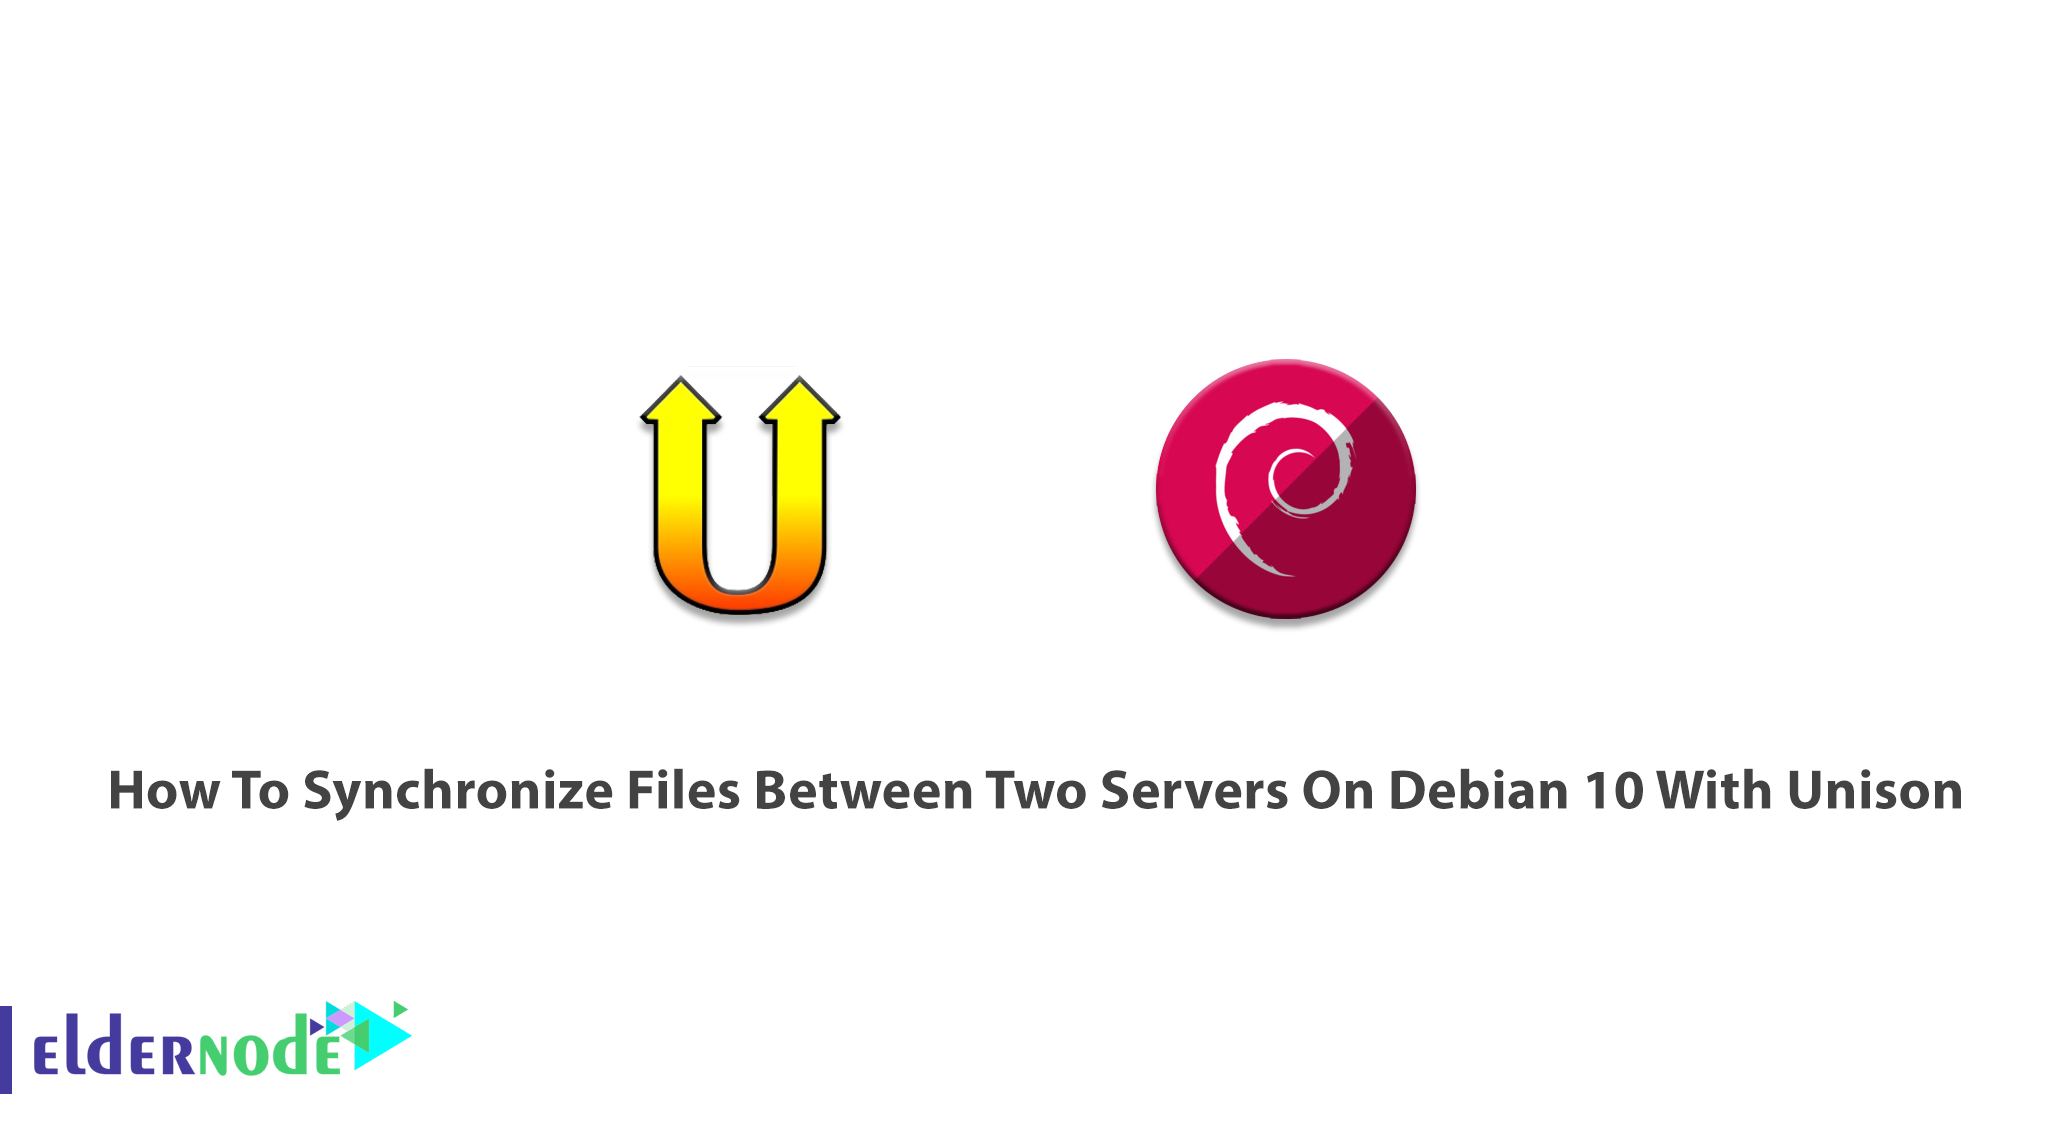 How To Synchronize Files Between Two Servers On Debian 10 With Unison